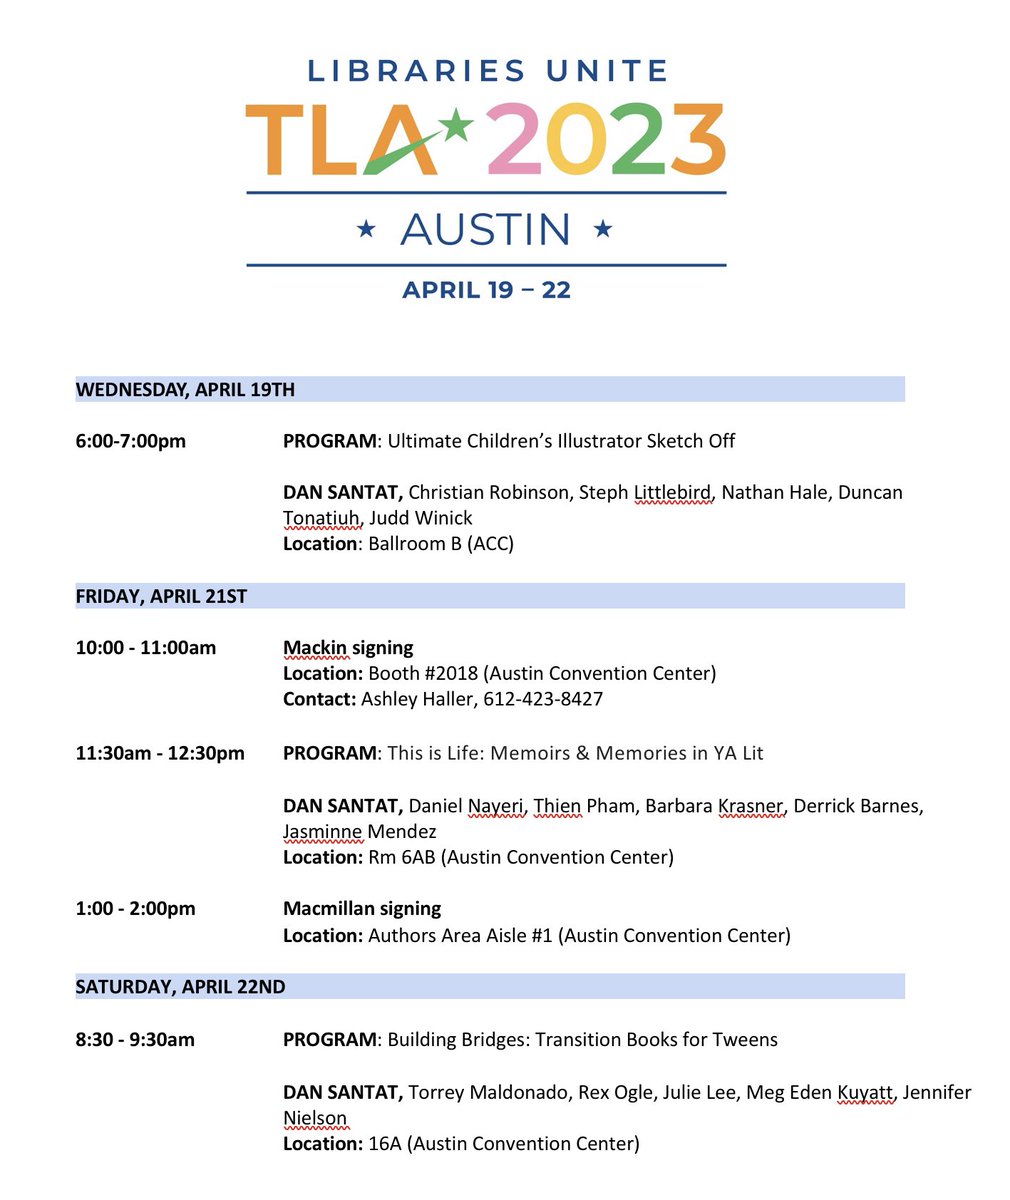 I’m at #TLA2023 

Here I will be….